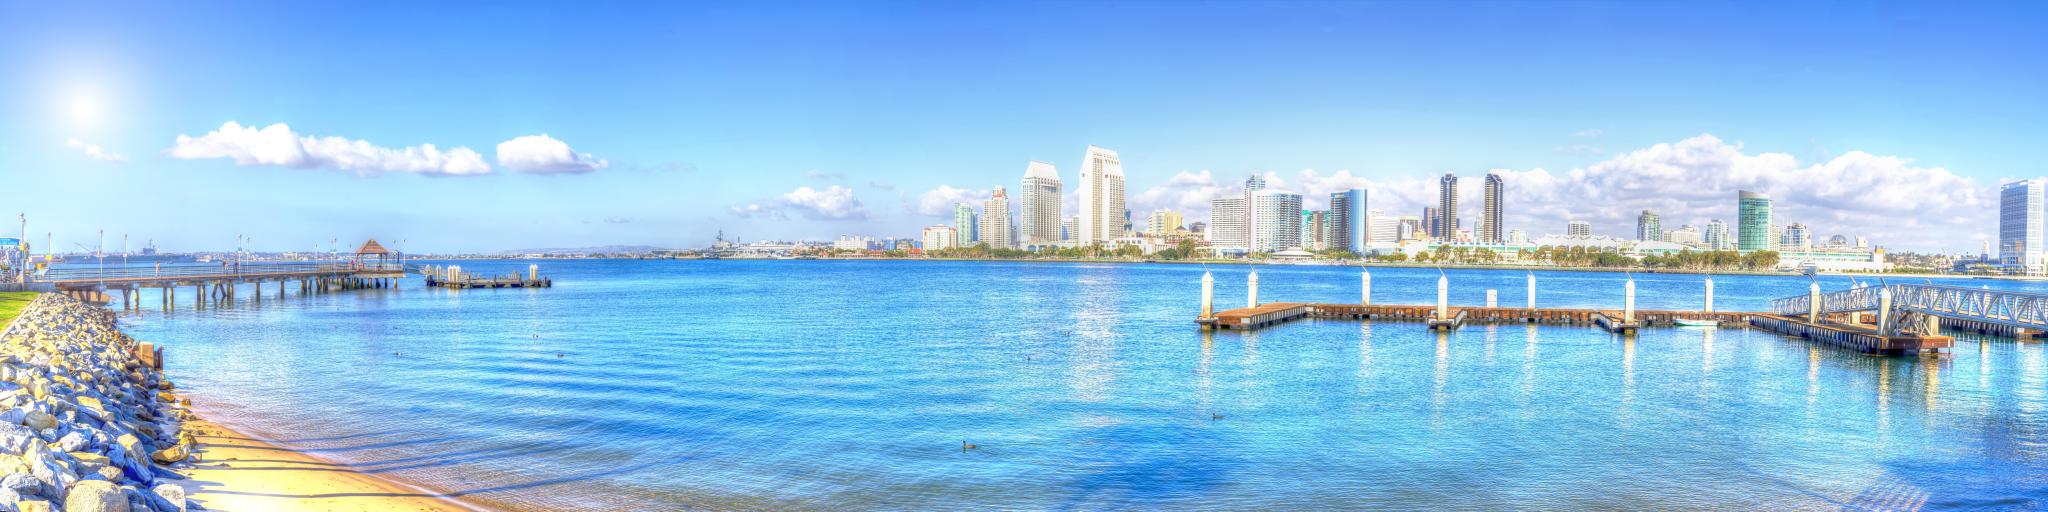 A panoramic view of the skyline of San Diego   with a thick white sheet of stretched out cotton-like clouds in a blue sky reflecting the sea in a sunny morning